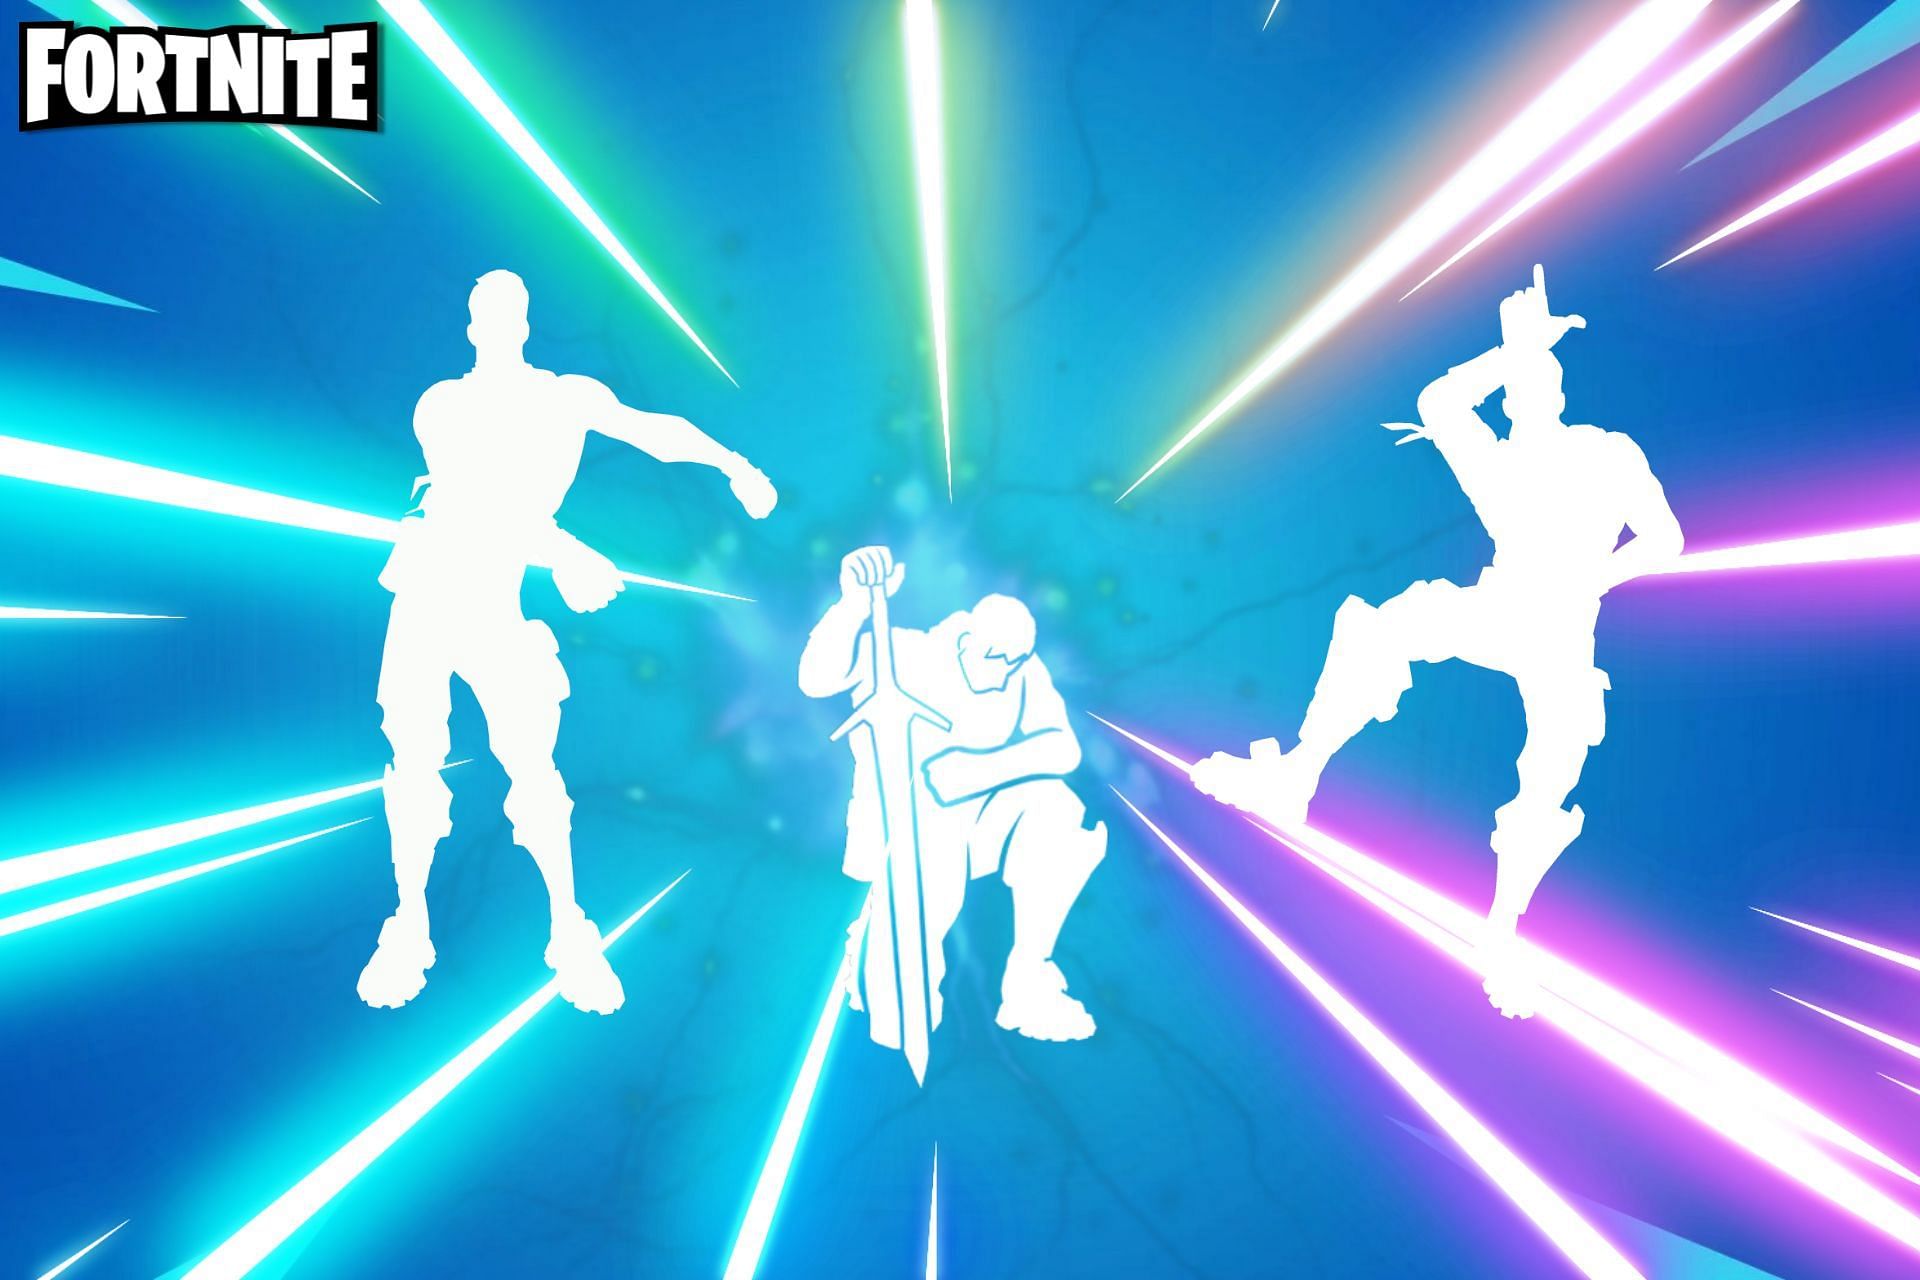 These emotes are among the most popular in Fortnite (Image via Sportskeeda)